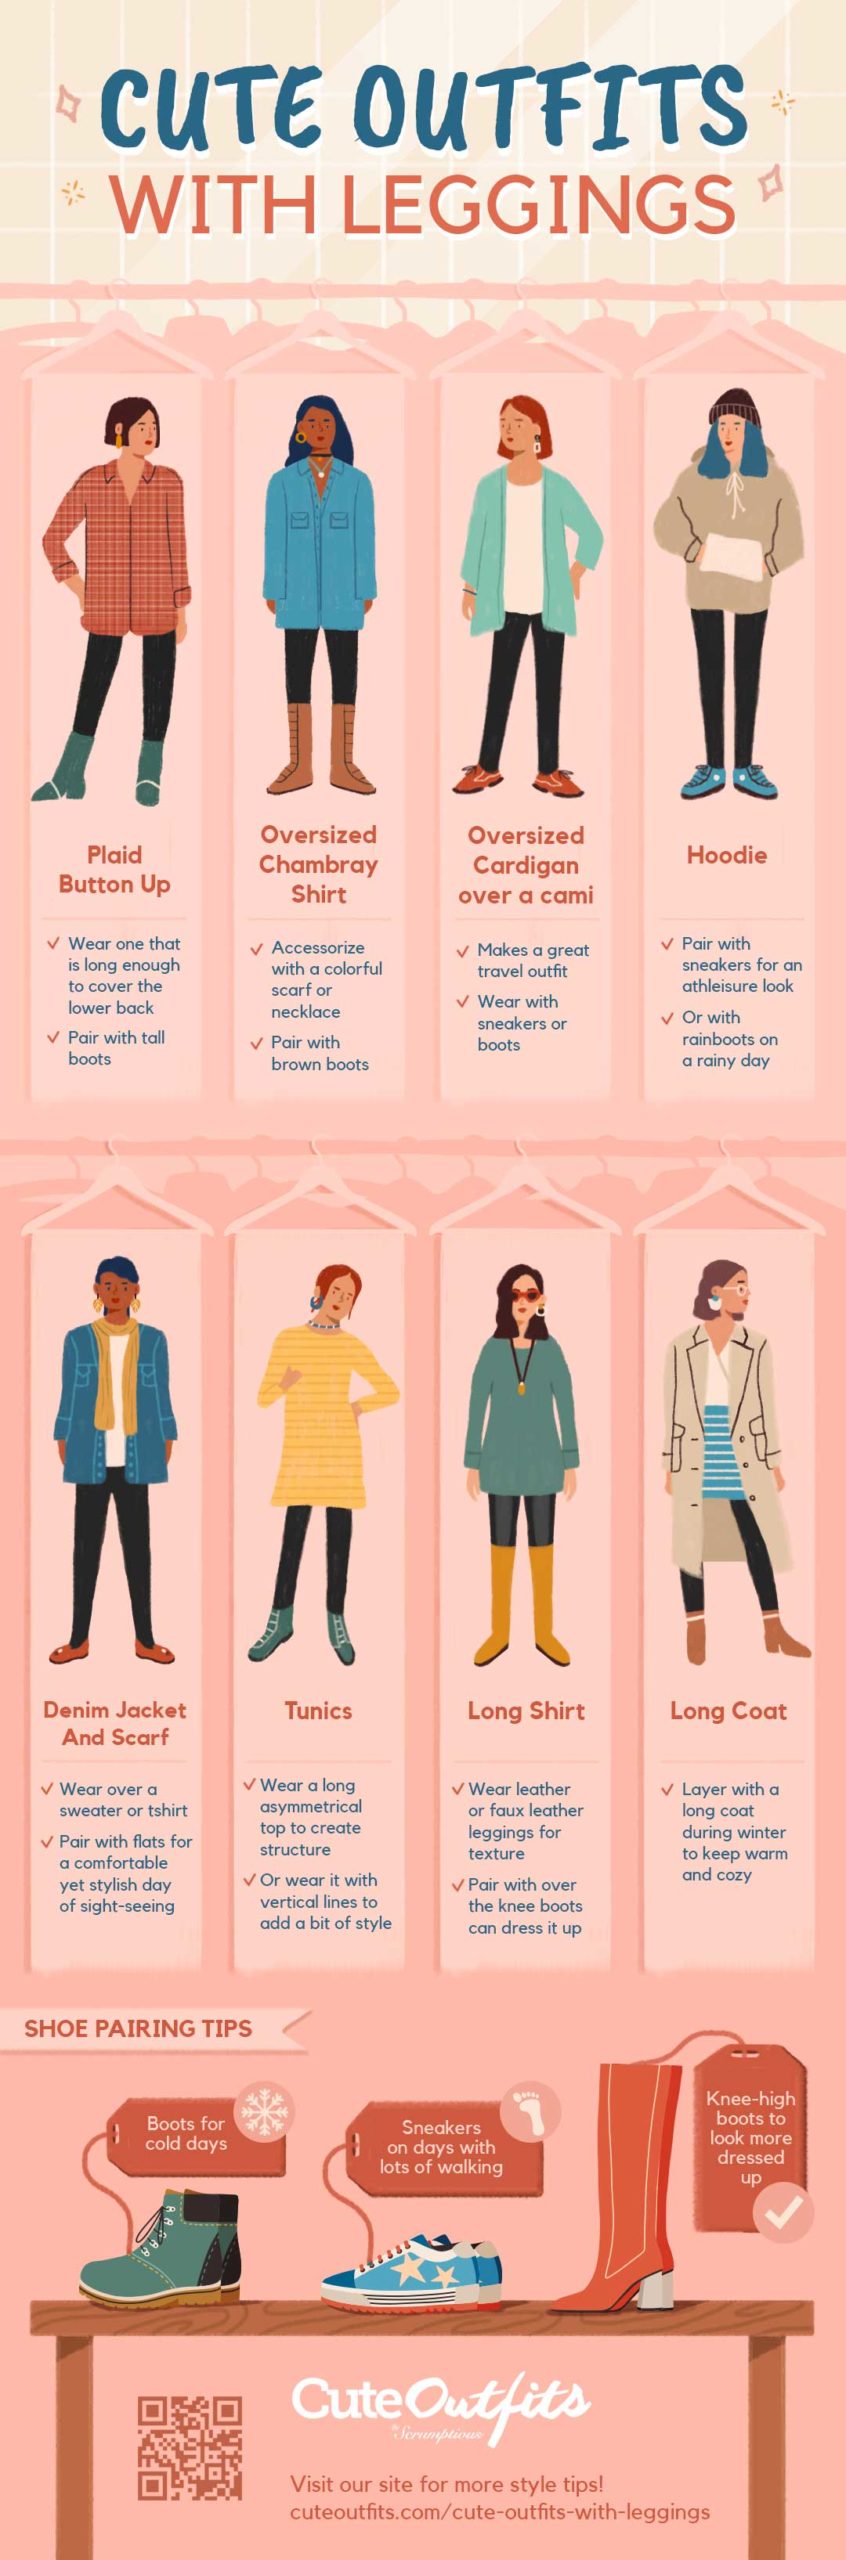 Cute Outfits With Leggings: What To Wear On Top [INFOGRAPHIC]